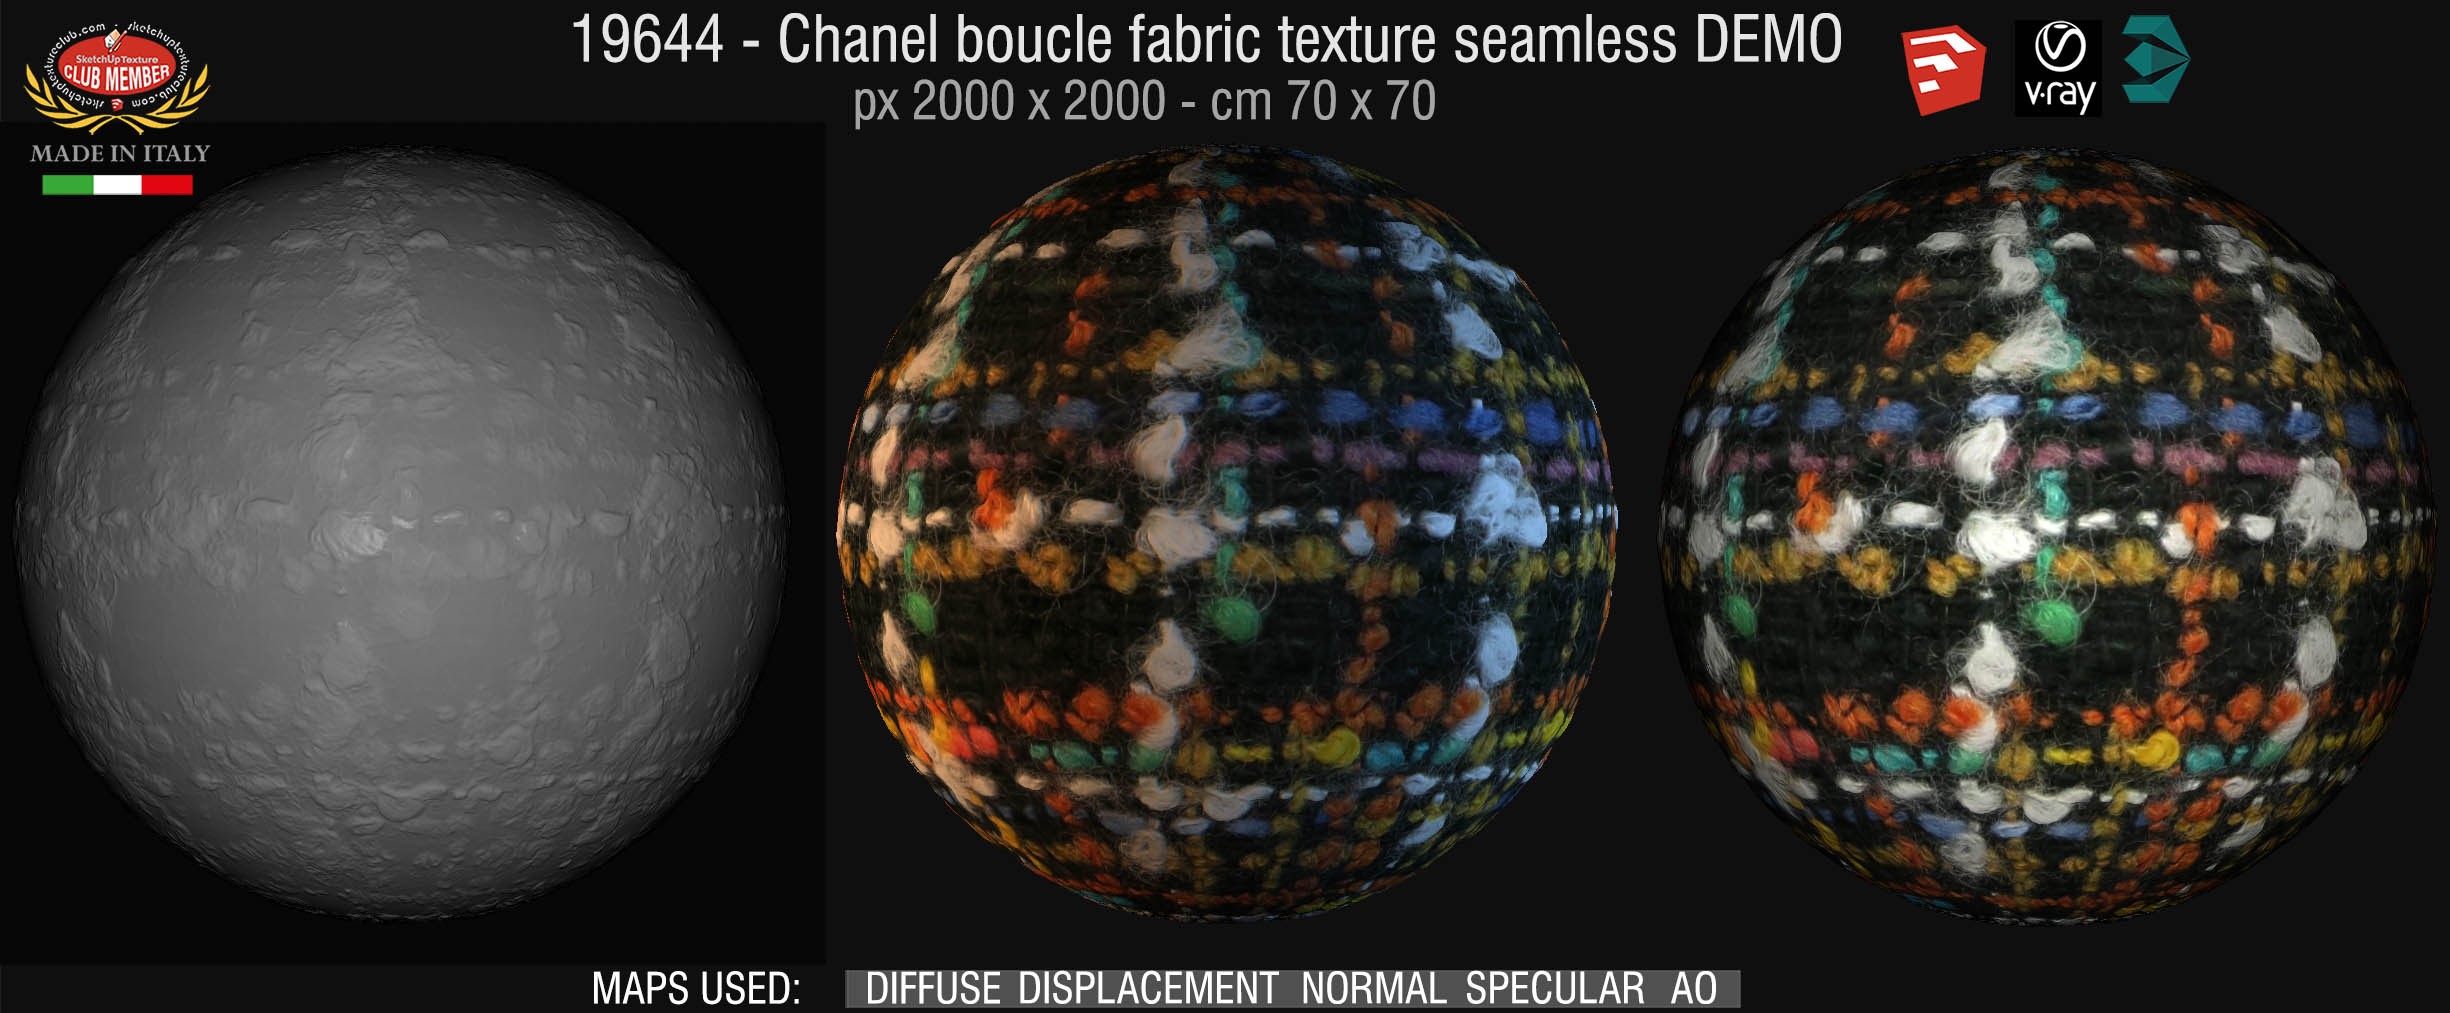 19644 Chanel boucle fabric texture seamless + maps DEMO